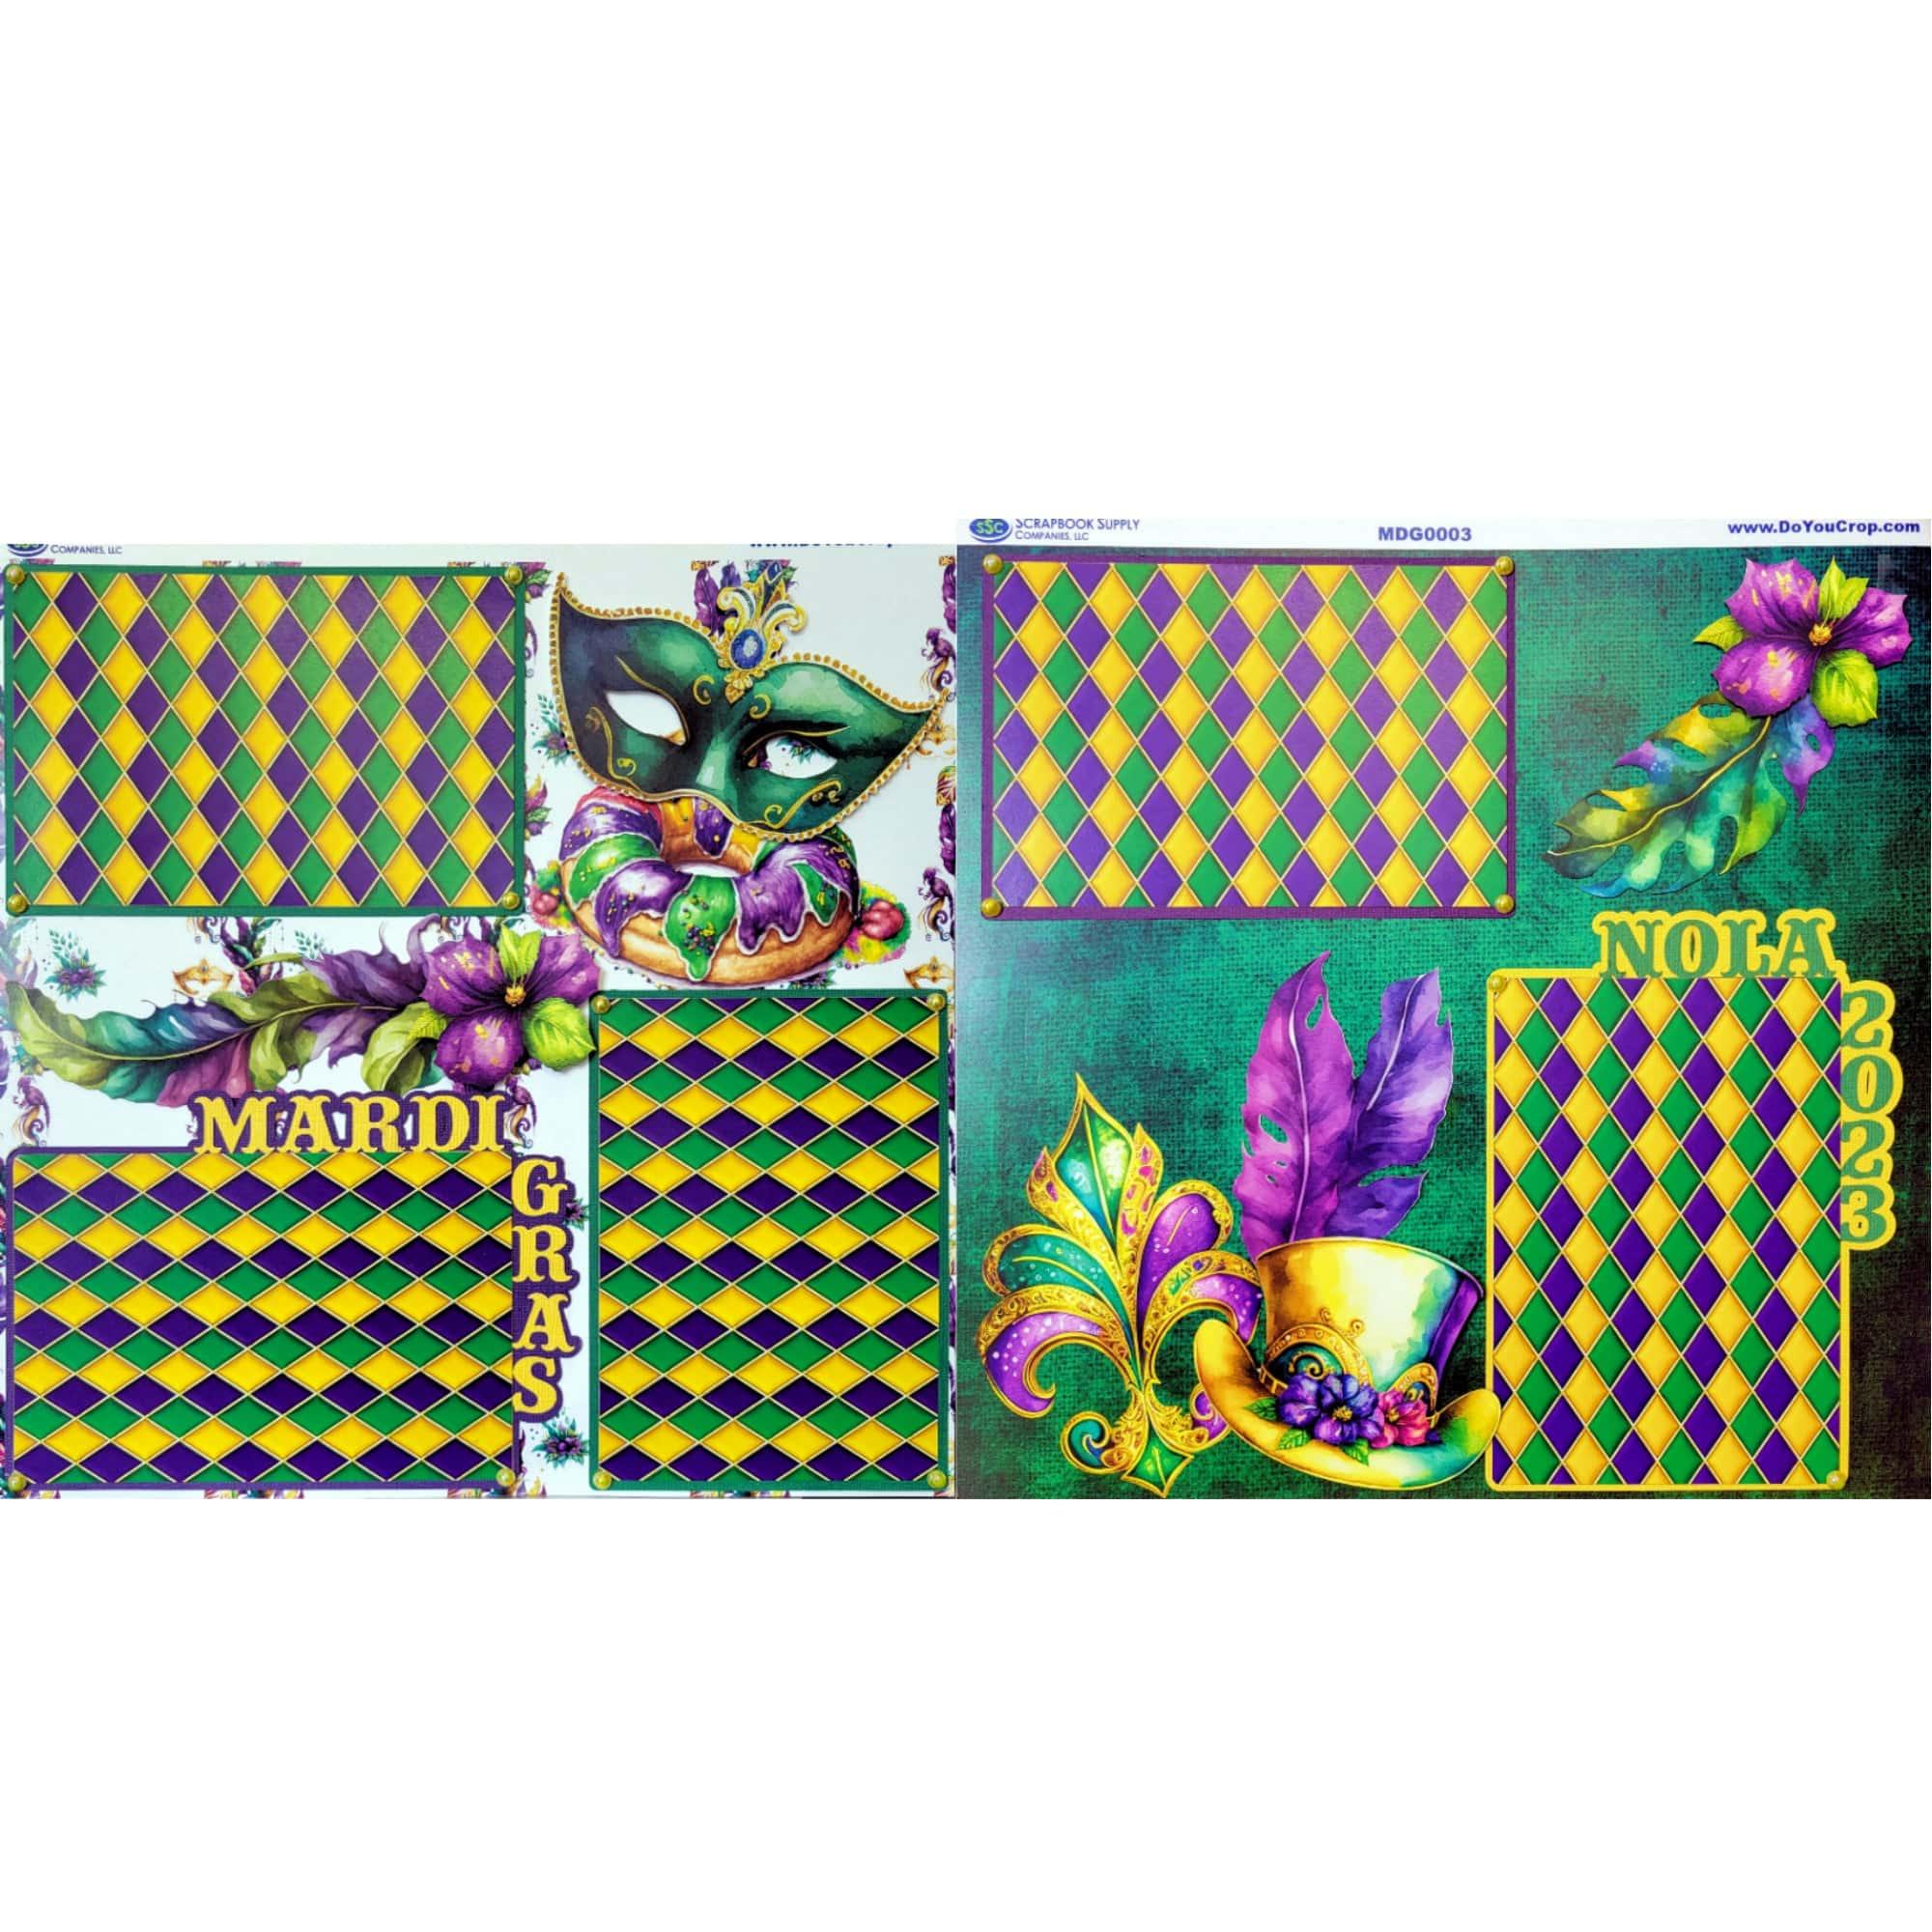 Mardi Gras 2023 (2) - 12 x 12 Pages, Fully-Assembled & Hand-Crafted 3D Scrapbook Premade by SSC Designs